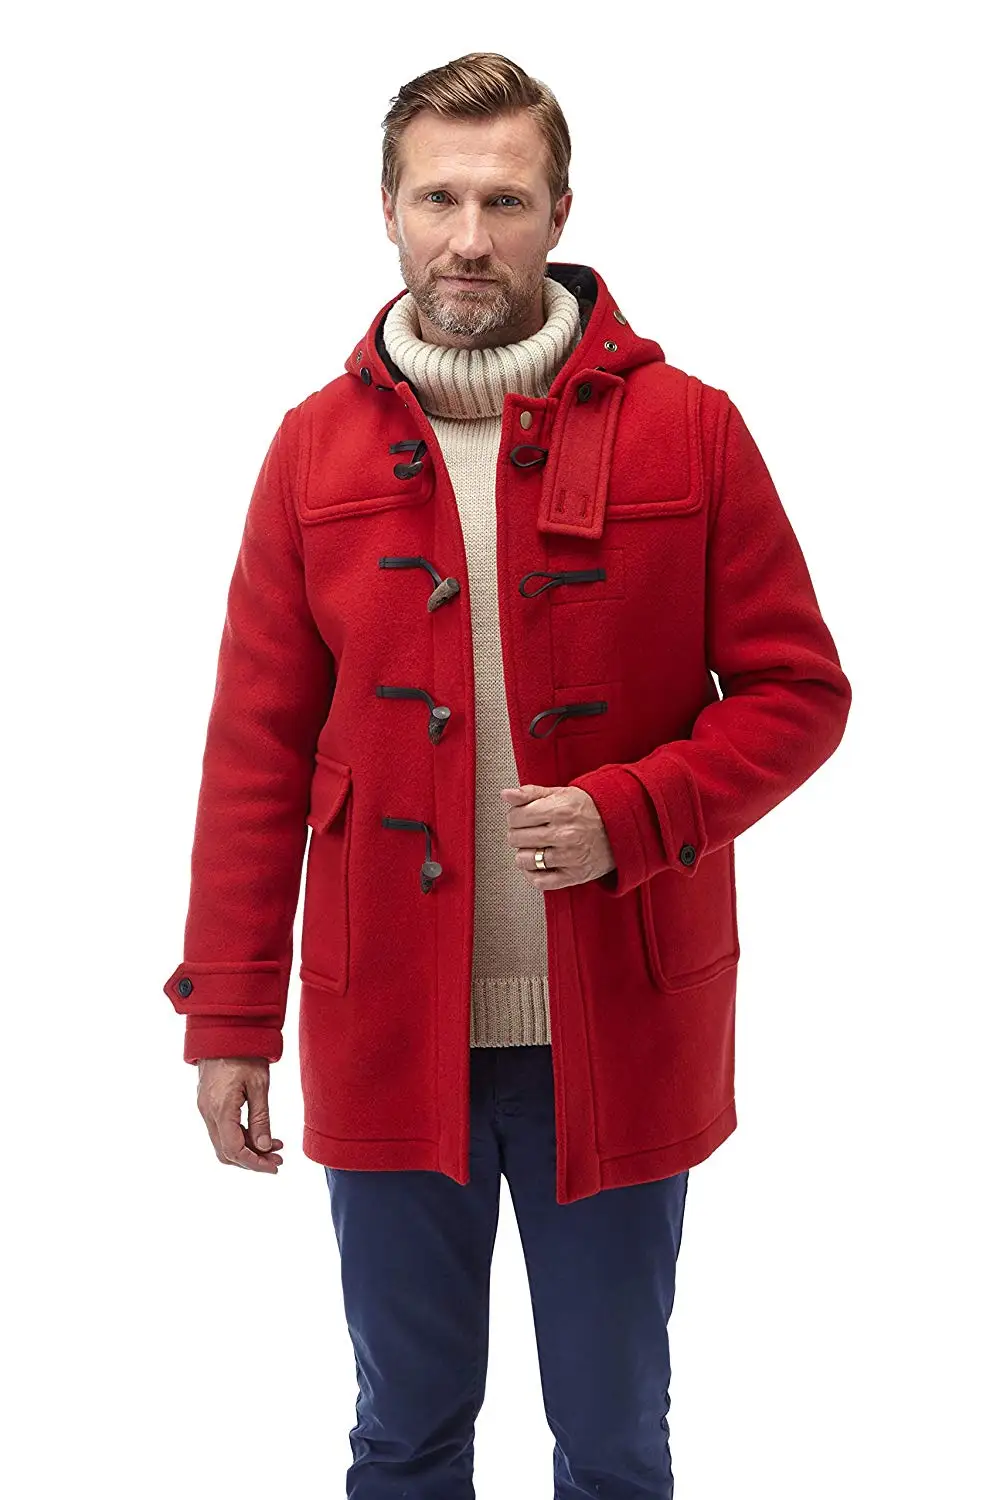 Cheap Red Duffle Coat, find Red Duffle Coat deals on line at Alibaba.com